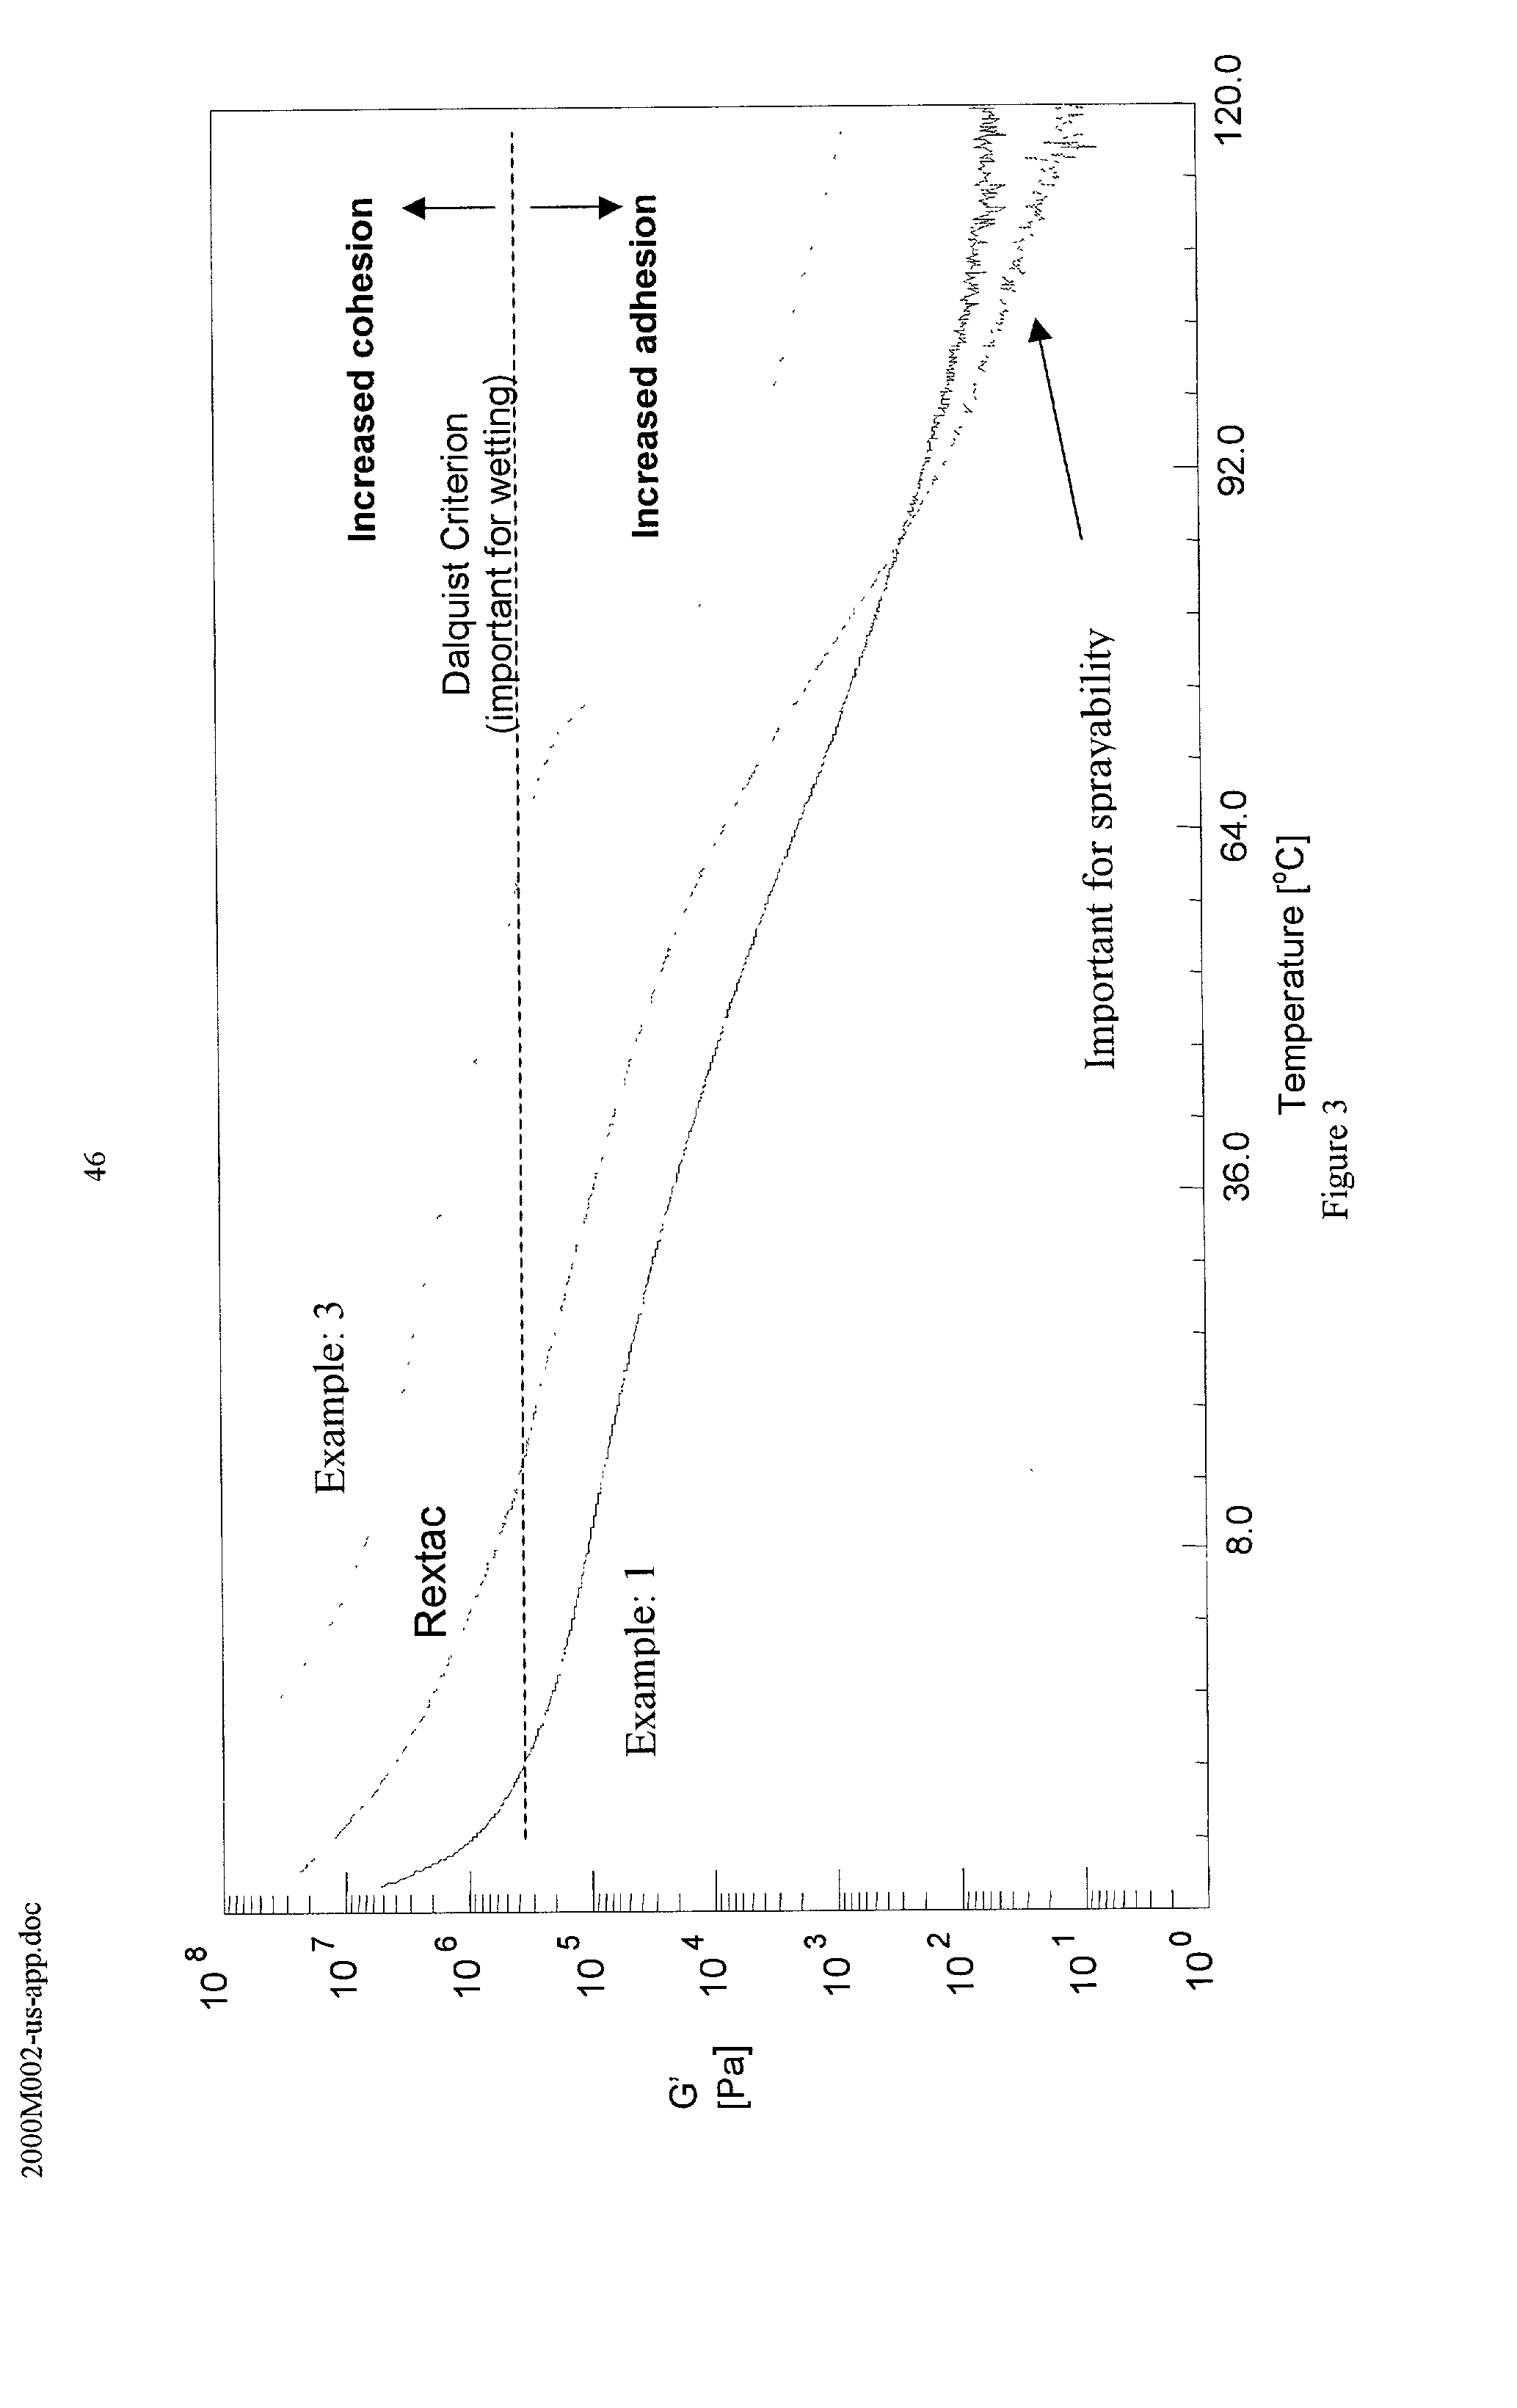 Adhesive alpha-olefin inter-polymers